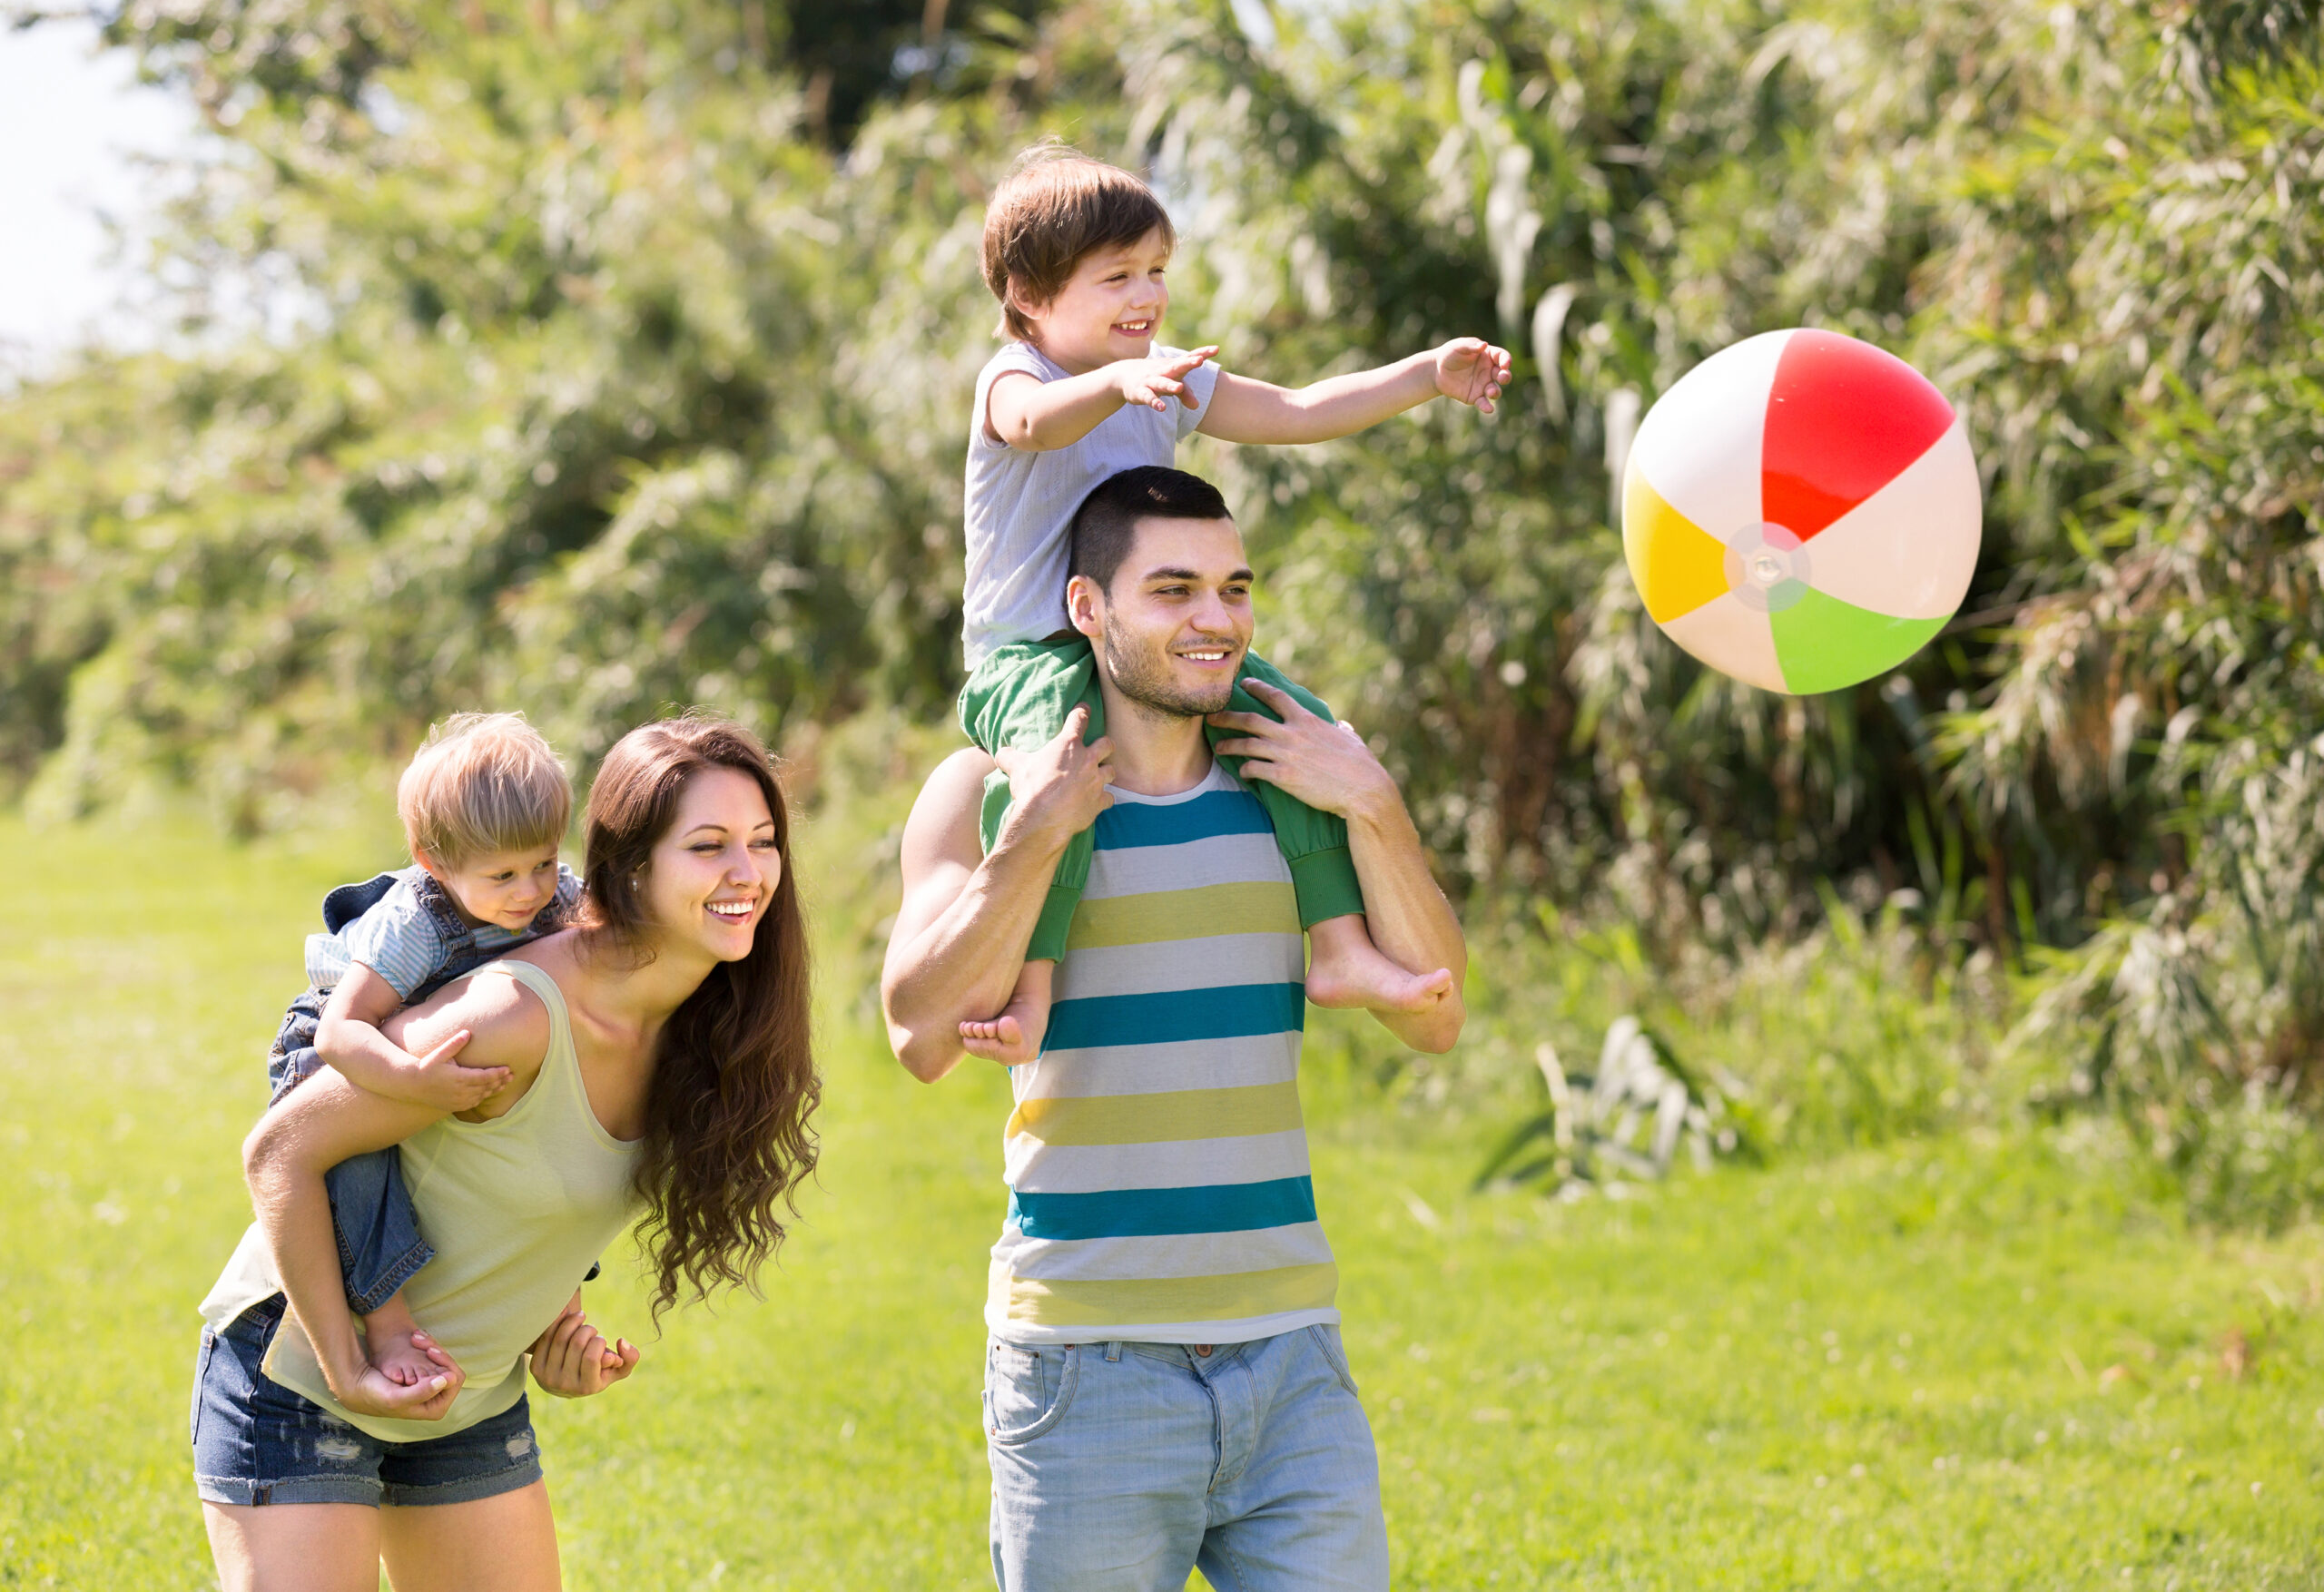 Vasomin is a heart health supplement that may reduce chest wall pain and improve mental clarity. Optimize you. A family plays with a beach ball in a park. 